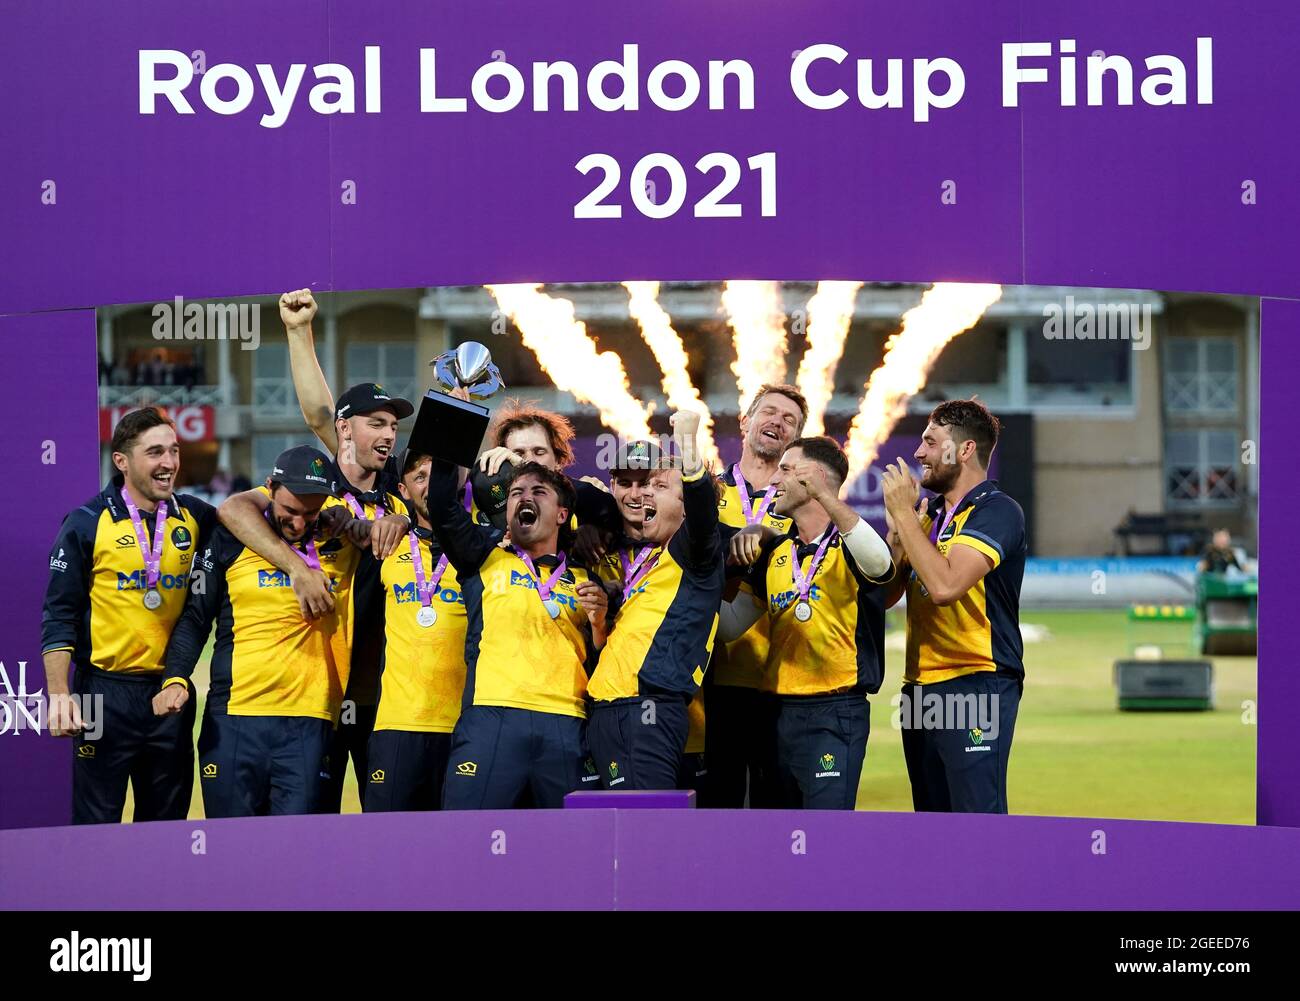 Glamorgan captain Kiran Carlson (centre) and team-mates celebrate with the trophy following victory after the Royal London One-Day Cup Final at Trent Bridge, Nottingham. Picture date: Thursday August 19, 2021. See PA story CRICKET Final. Photo credit should read: Zac Goodwin/PA Wire. RESTRICTIONS: No commercial use without prior written consent of the ECB. Still image use only. No moving images to emulate broadcast. Editorial use only. No removing or obscuring of sponsor logos. Stock Photo